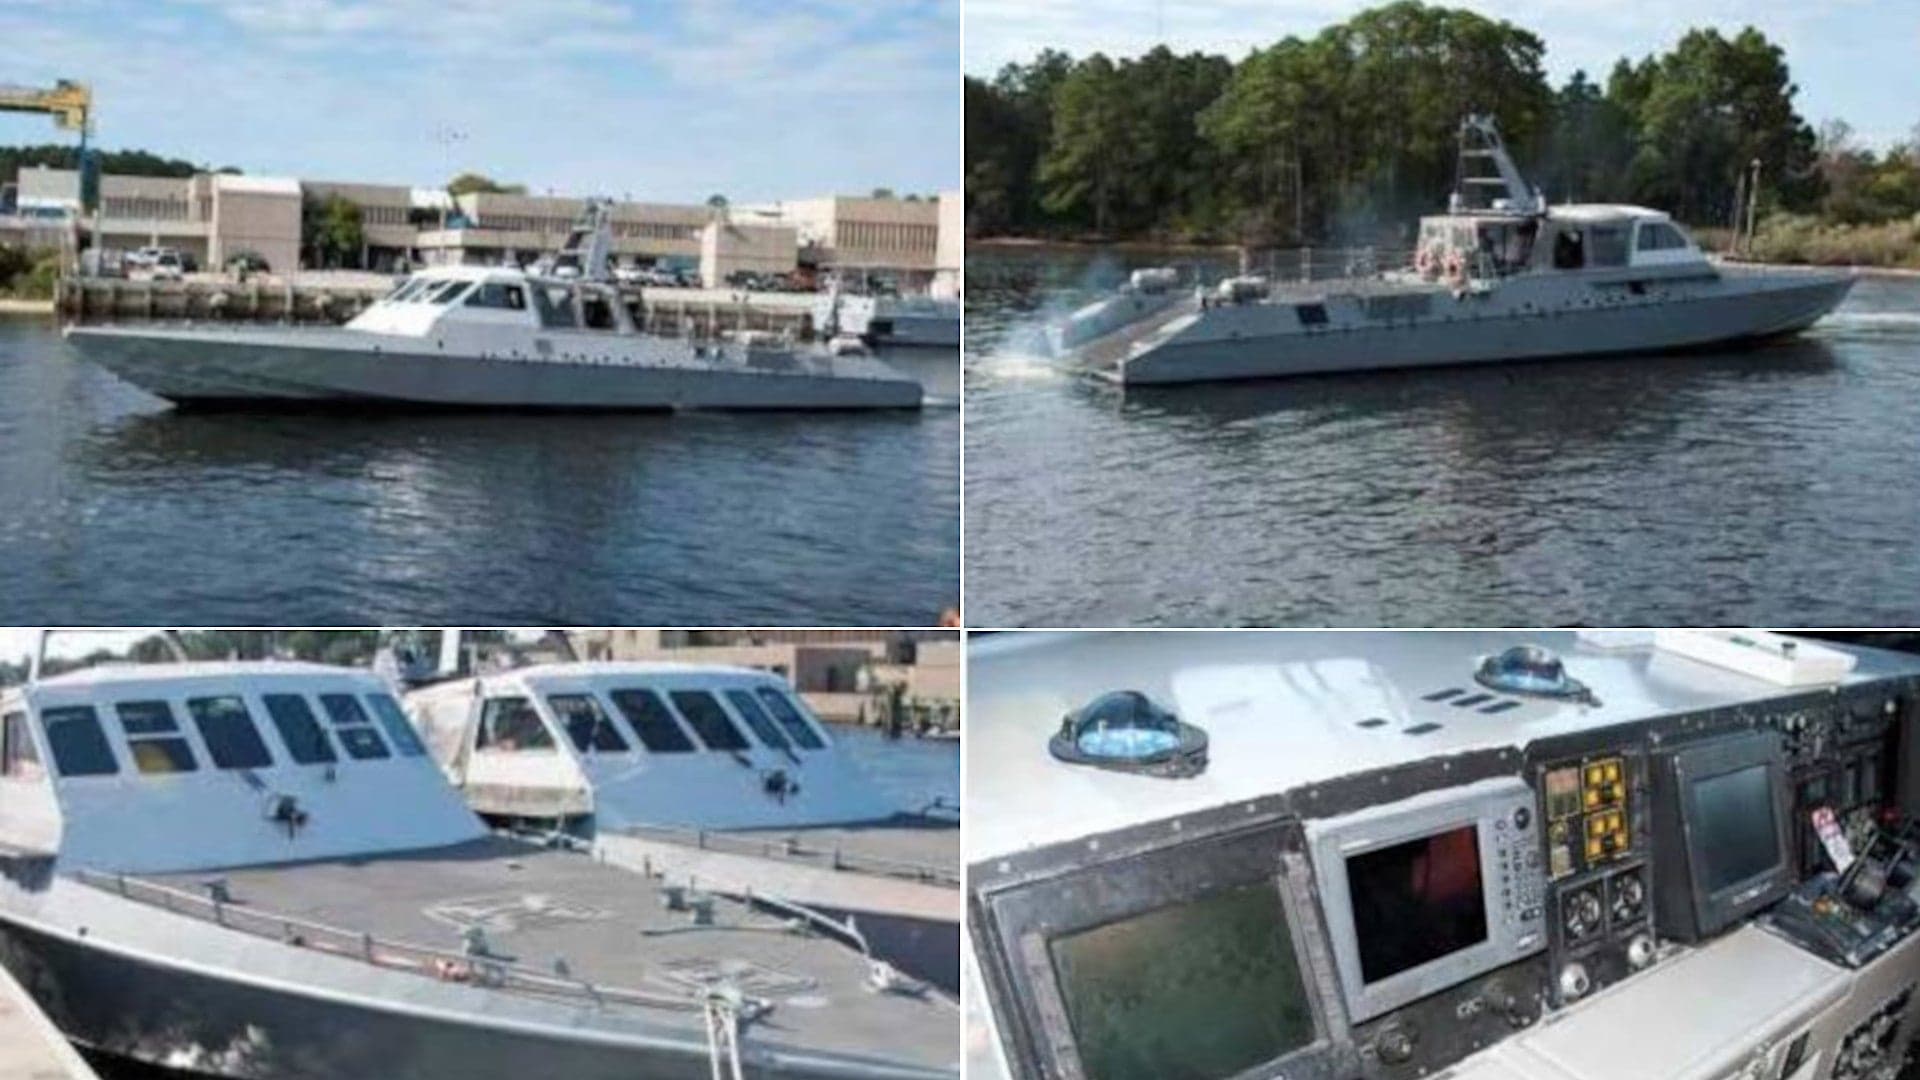 This High-Speed Special Operations Boat Used By Navy SEALs Can Now Be Yours